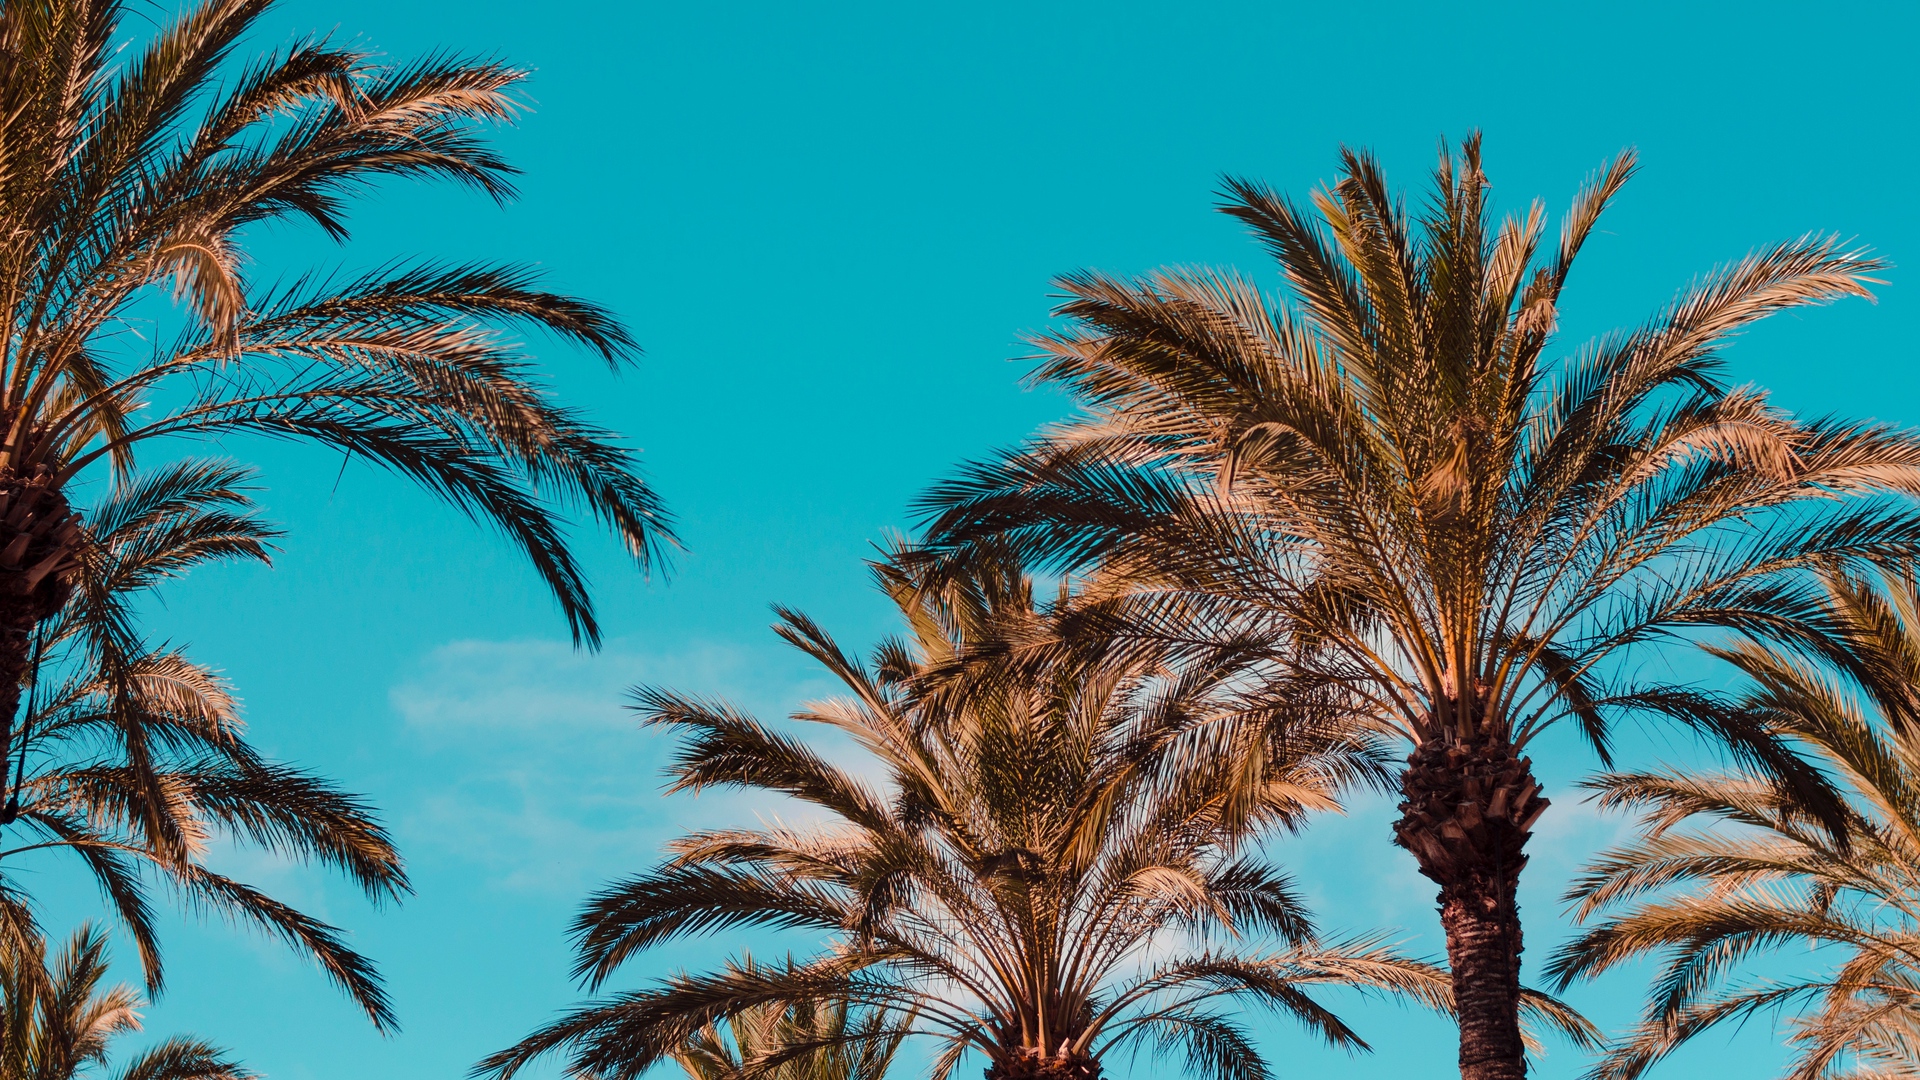 General 1920x1080 turquoise sky nature palm trees